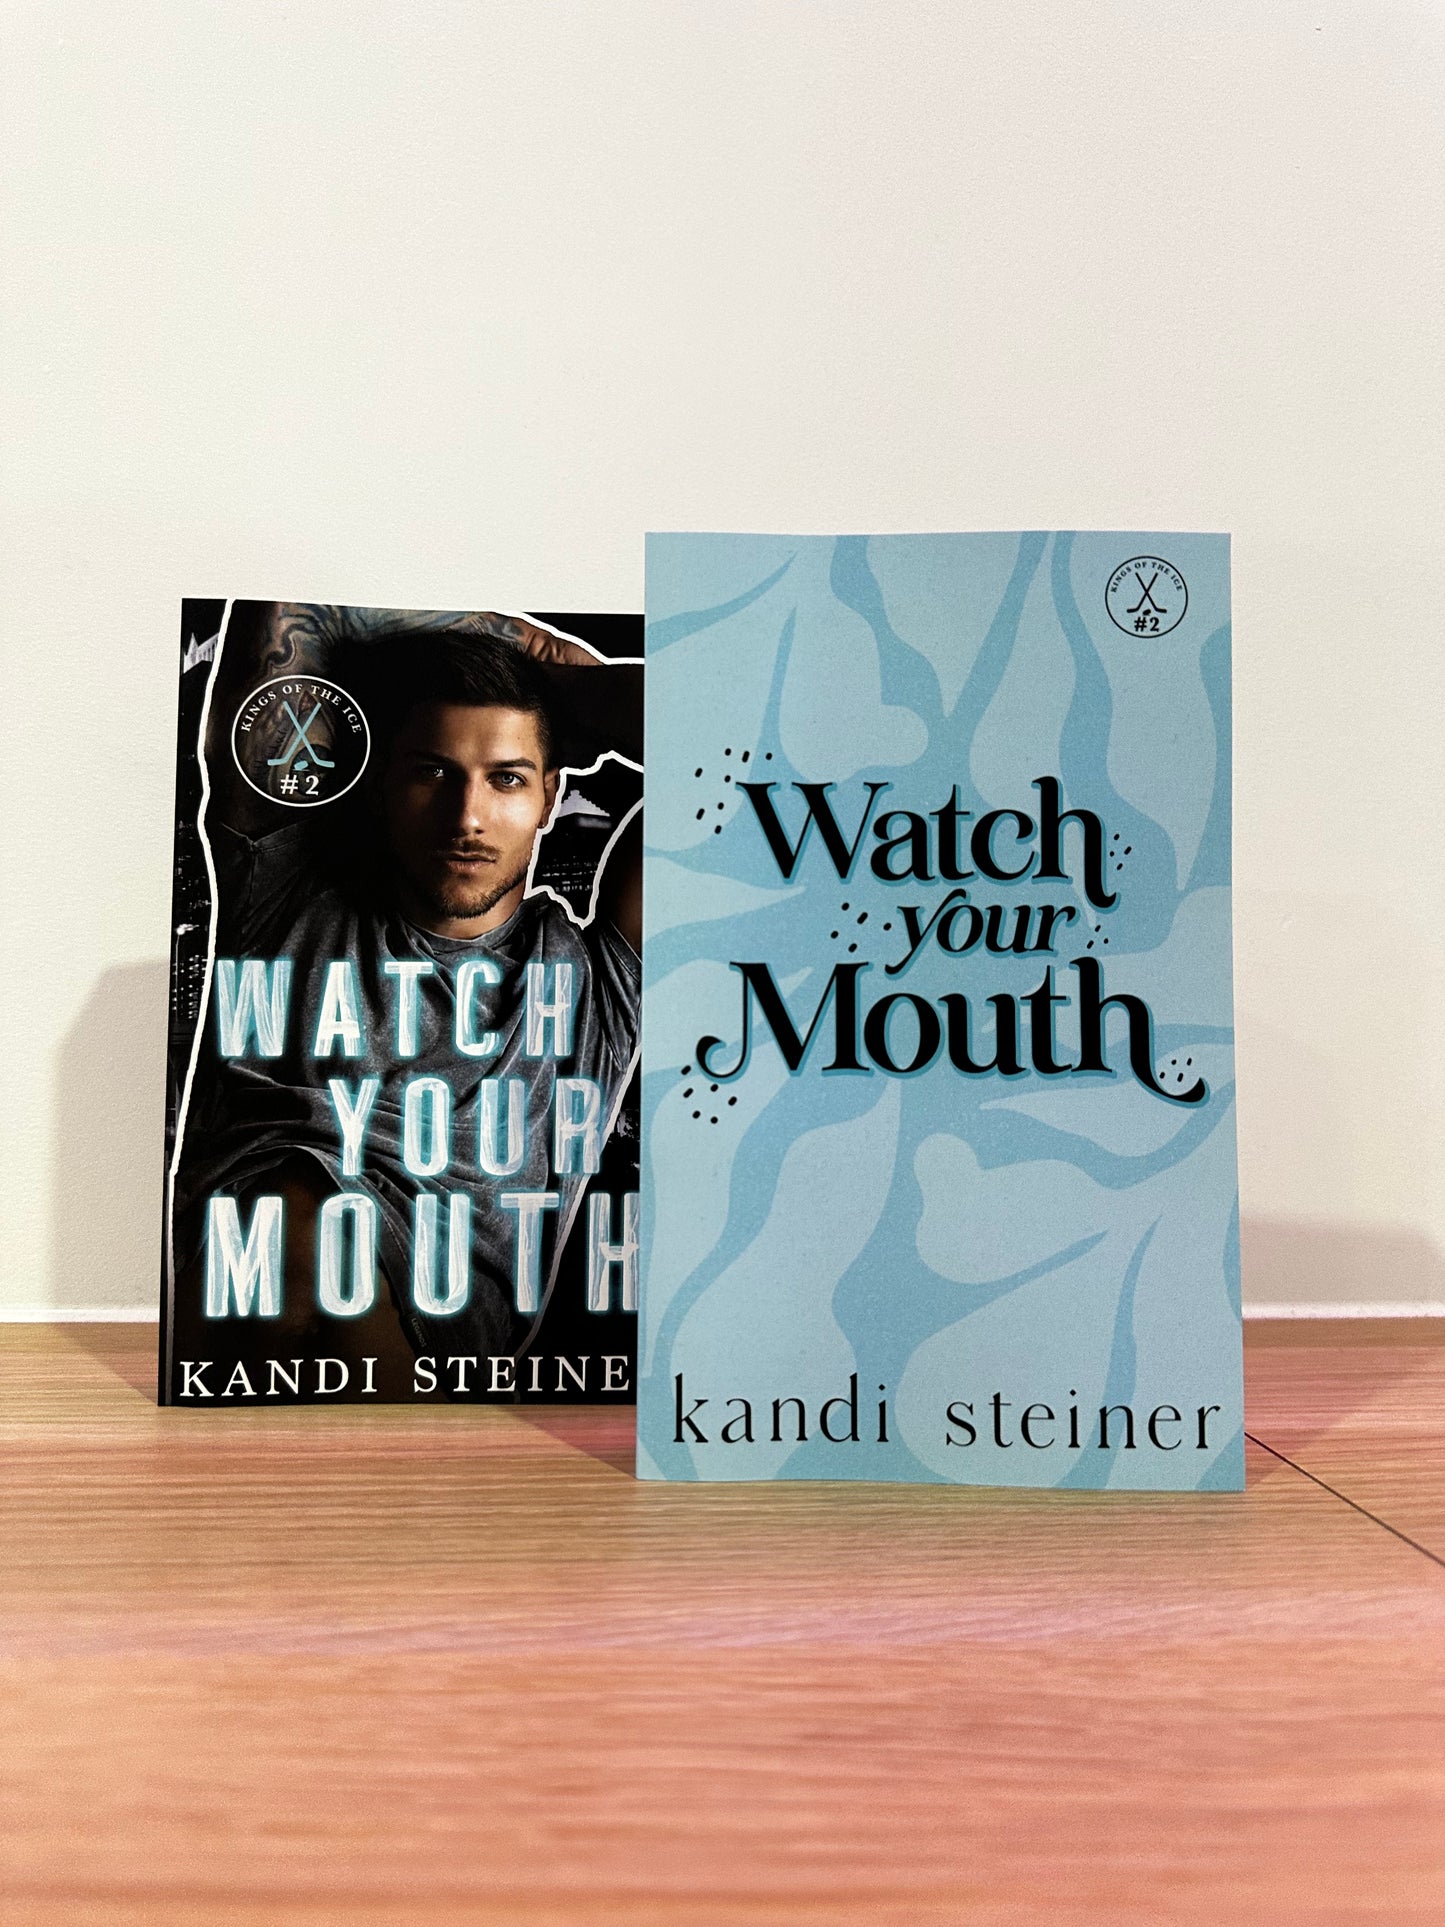 Kings of the Ice series by Kandi Steiner